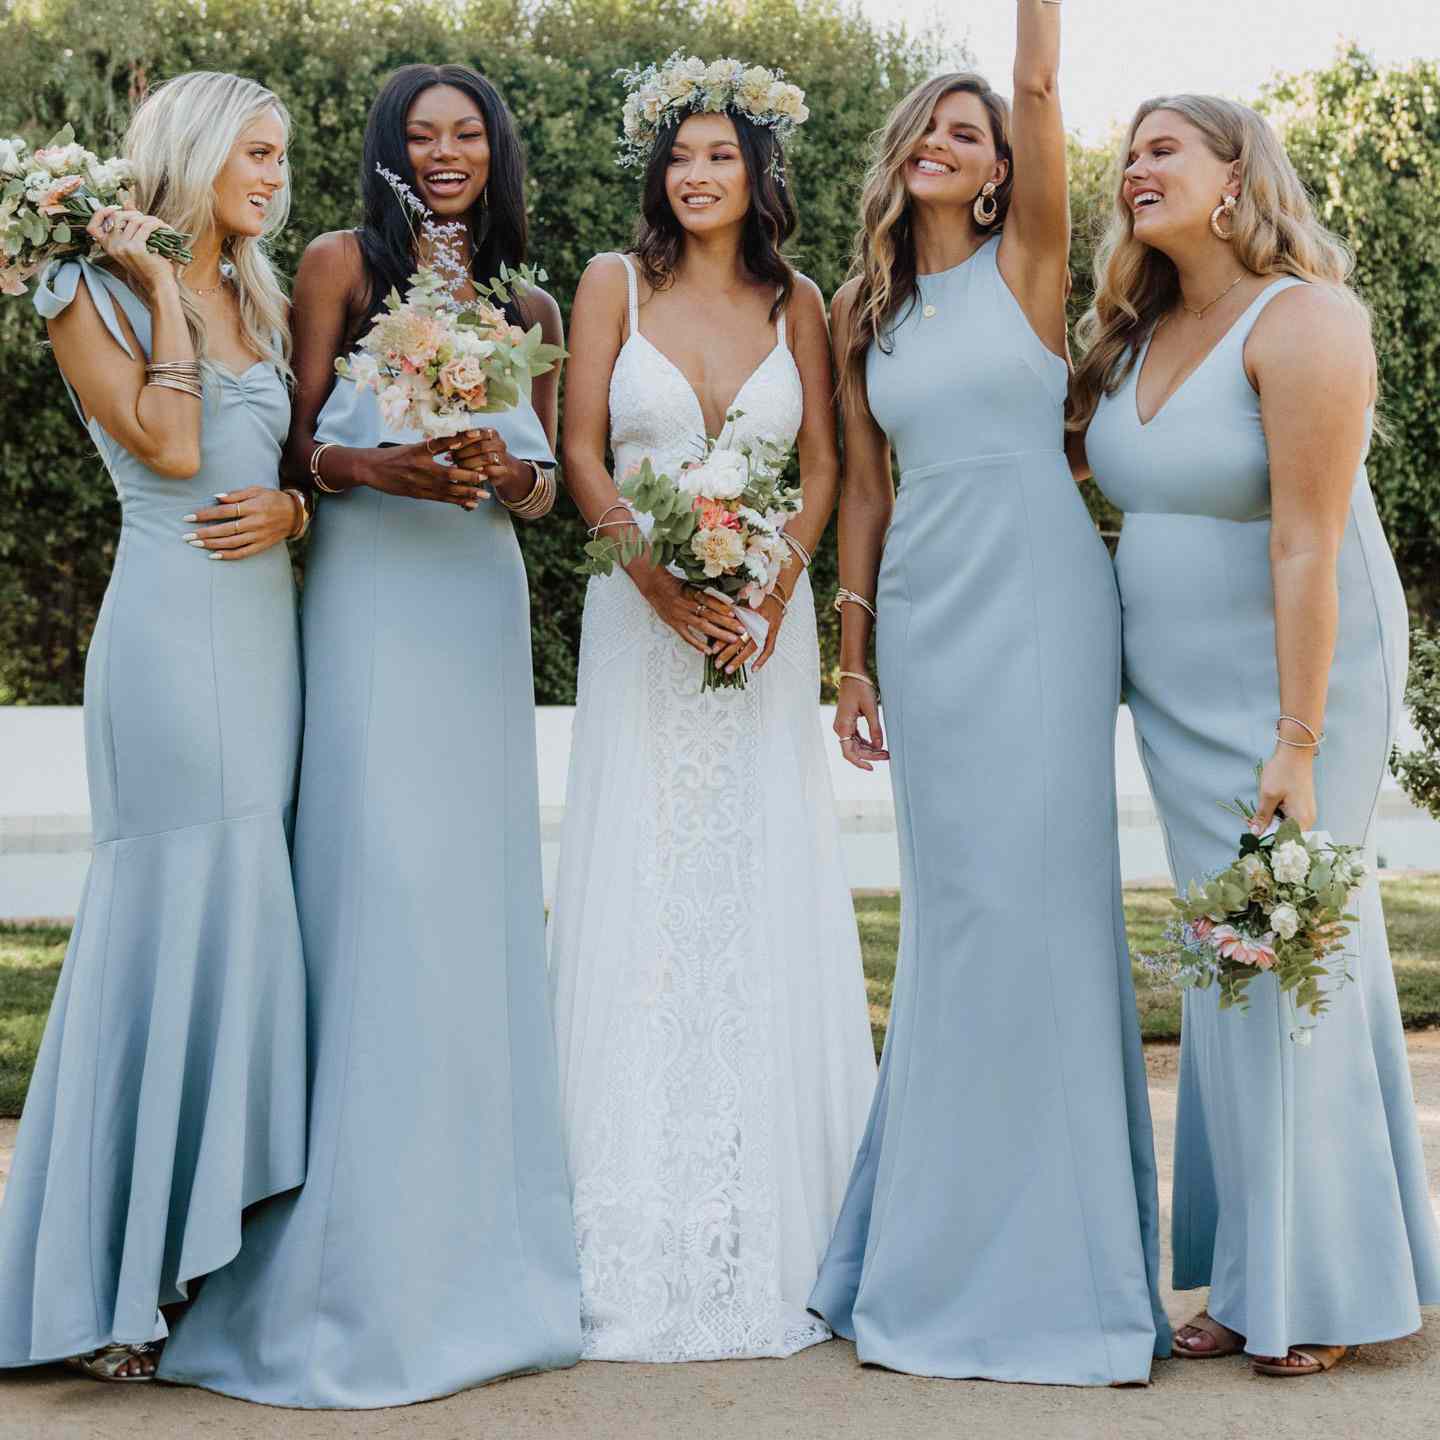 Mermaid burnt orange satin bridesmaid dresses are a bold and vibrant choice. Here are the best dresses you can choose from.